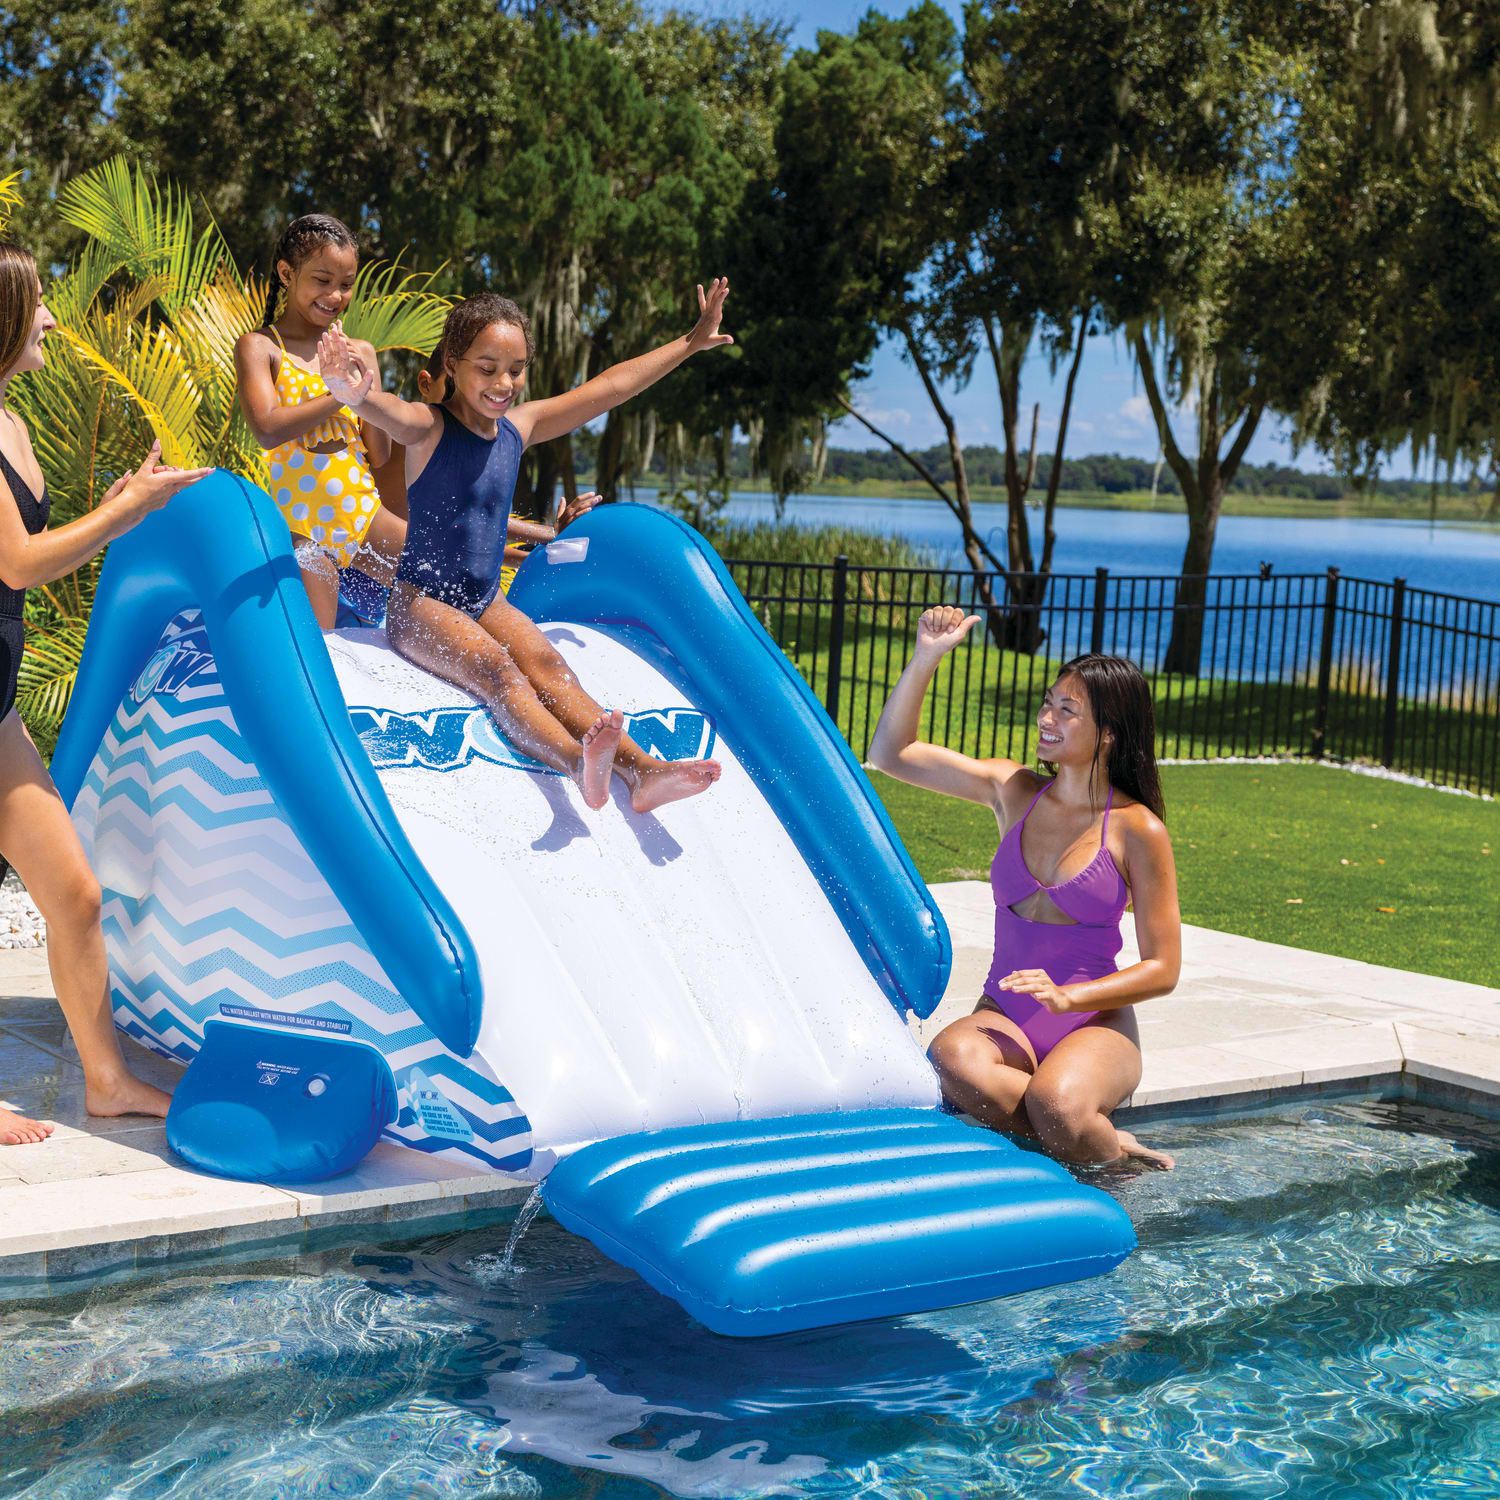 WOW Sports Cascade Pool Slide, Inflatable Slide with Sprinkler | Sam's Club